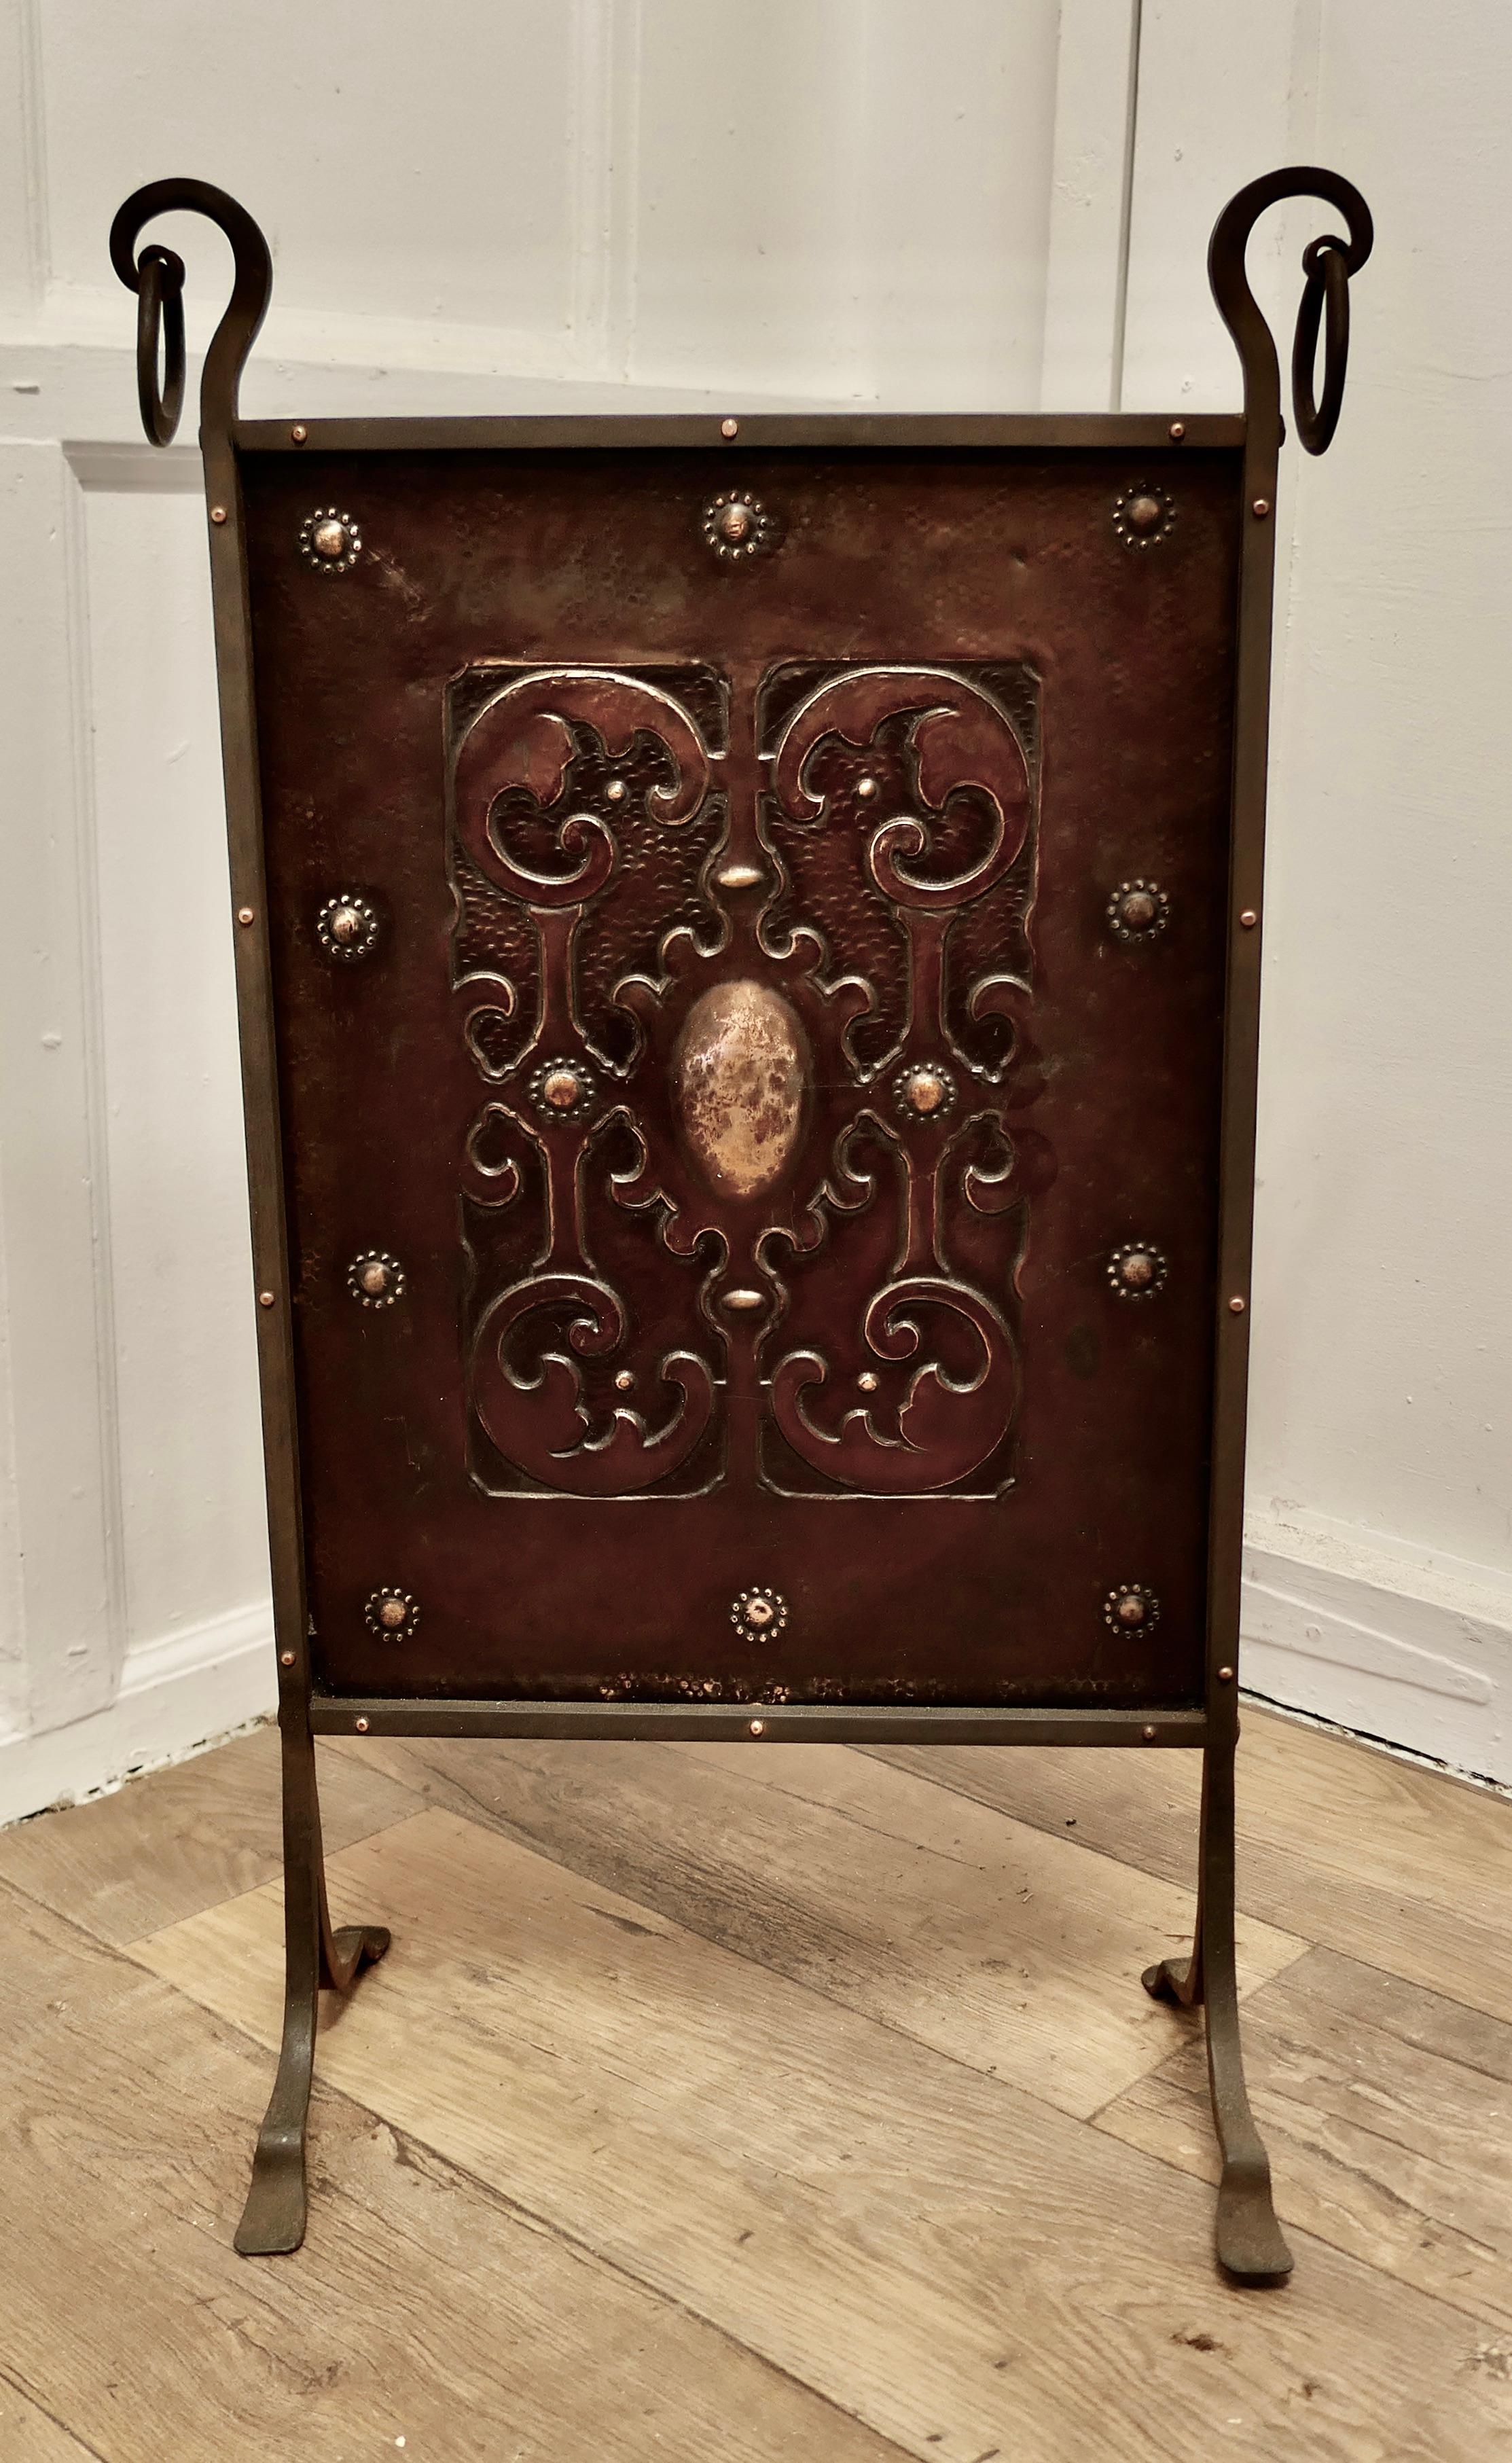 Victorian Arts and Crafts Copper and Iron Fire Screen

This is a Classic in the Arts and Crafts Gothic Style, it is a hand beaten copper screen, which is mounted on a very stylish wrought Iron frame with feet which carry all the way to the top